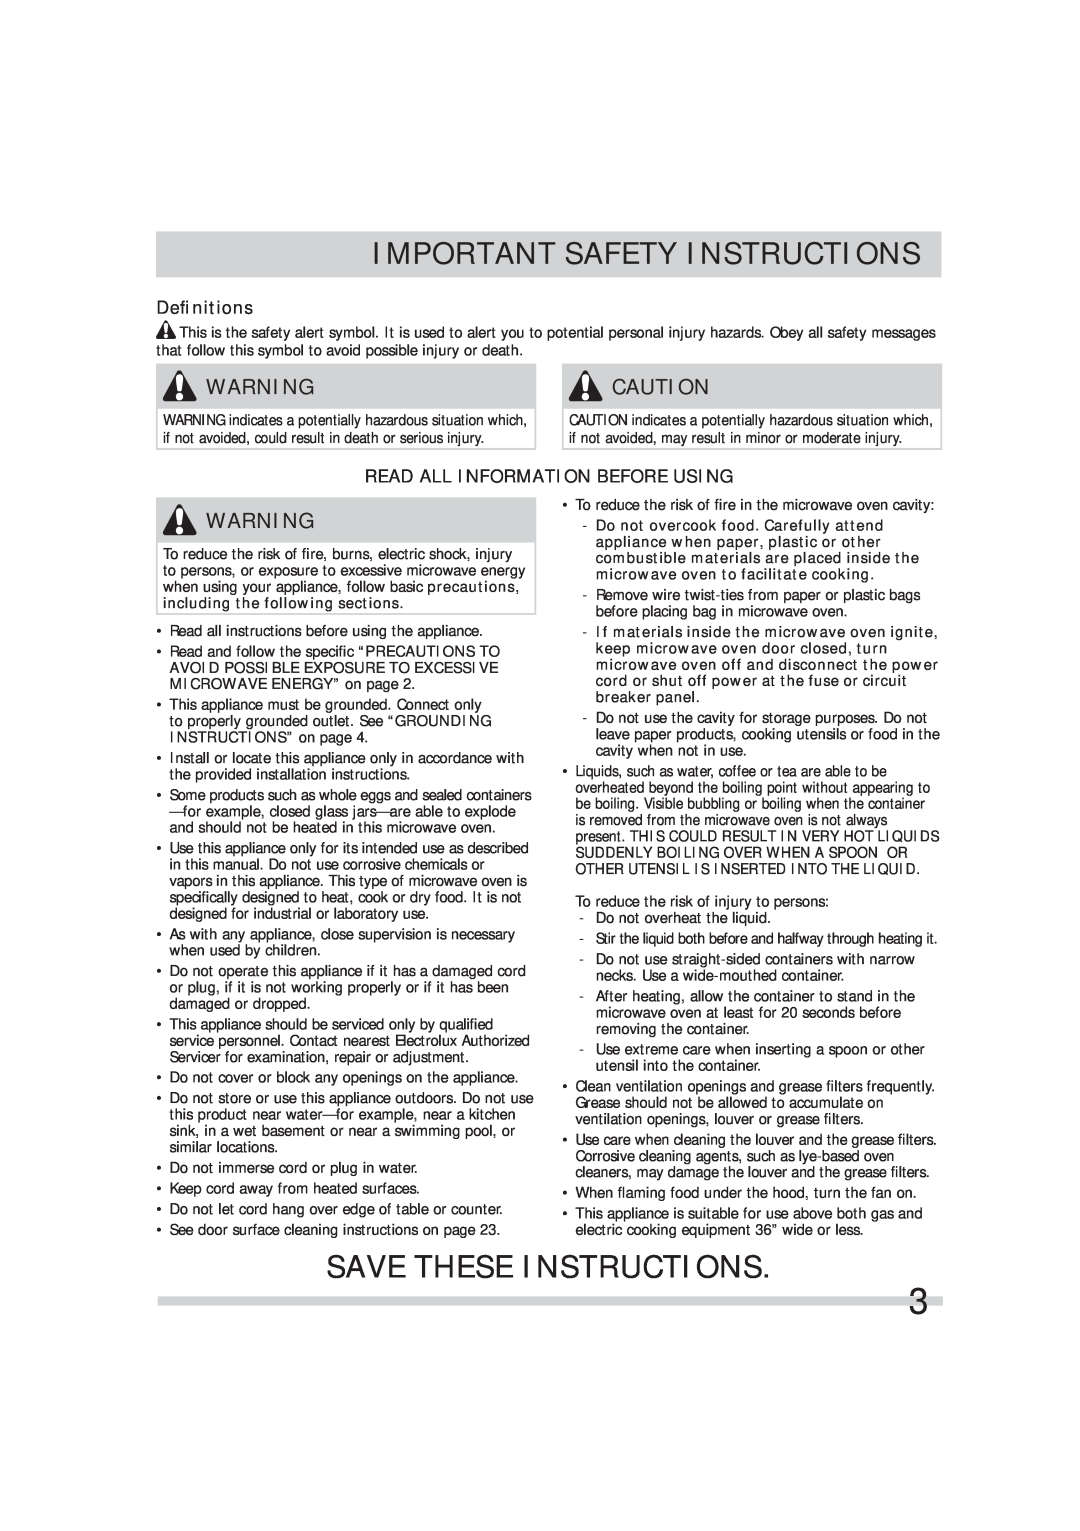 Frigidaire FGMV173KB Save These Instructions, Deﬁnitions, Read All Information Before Using, Important Safety Instructions 